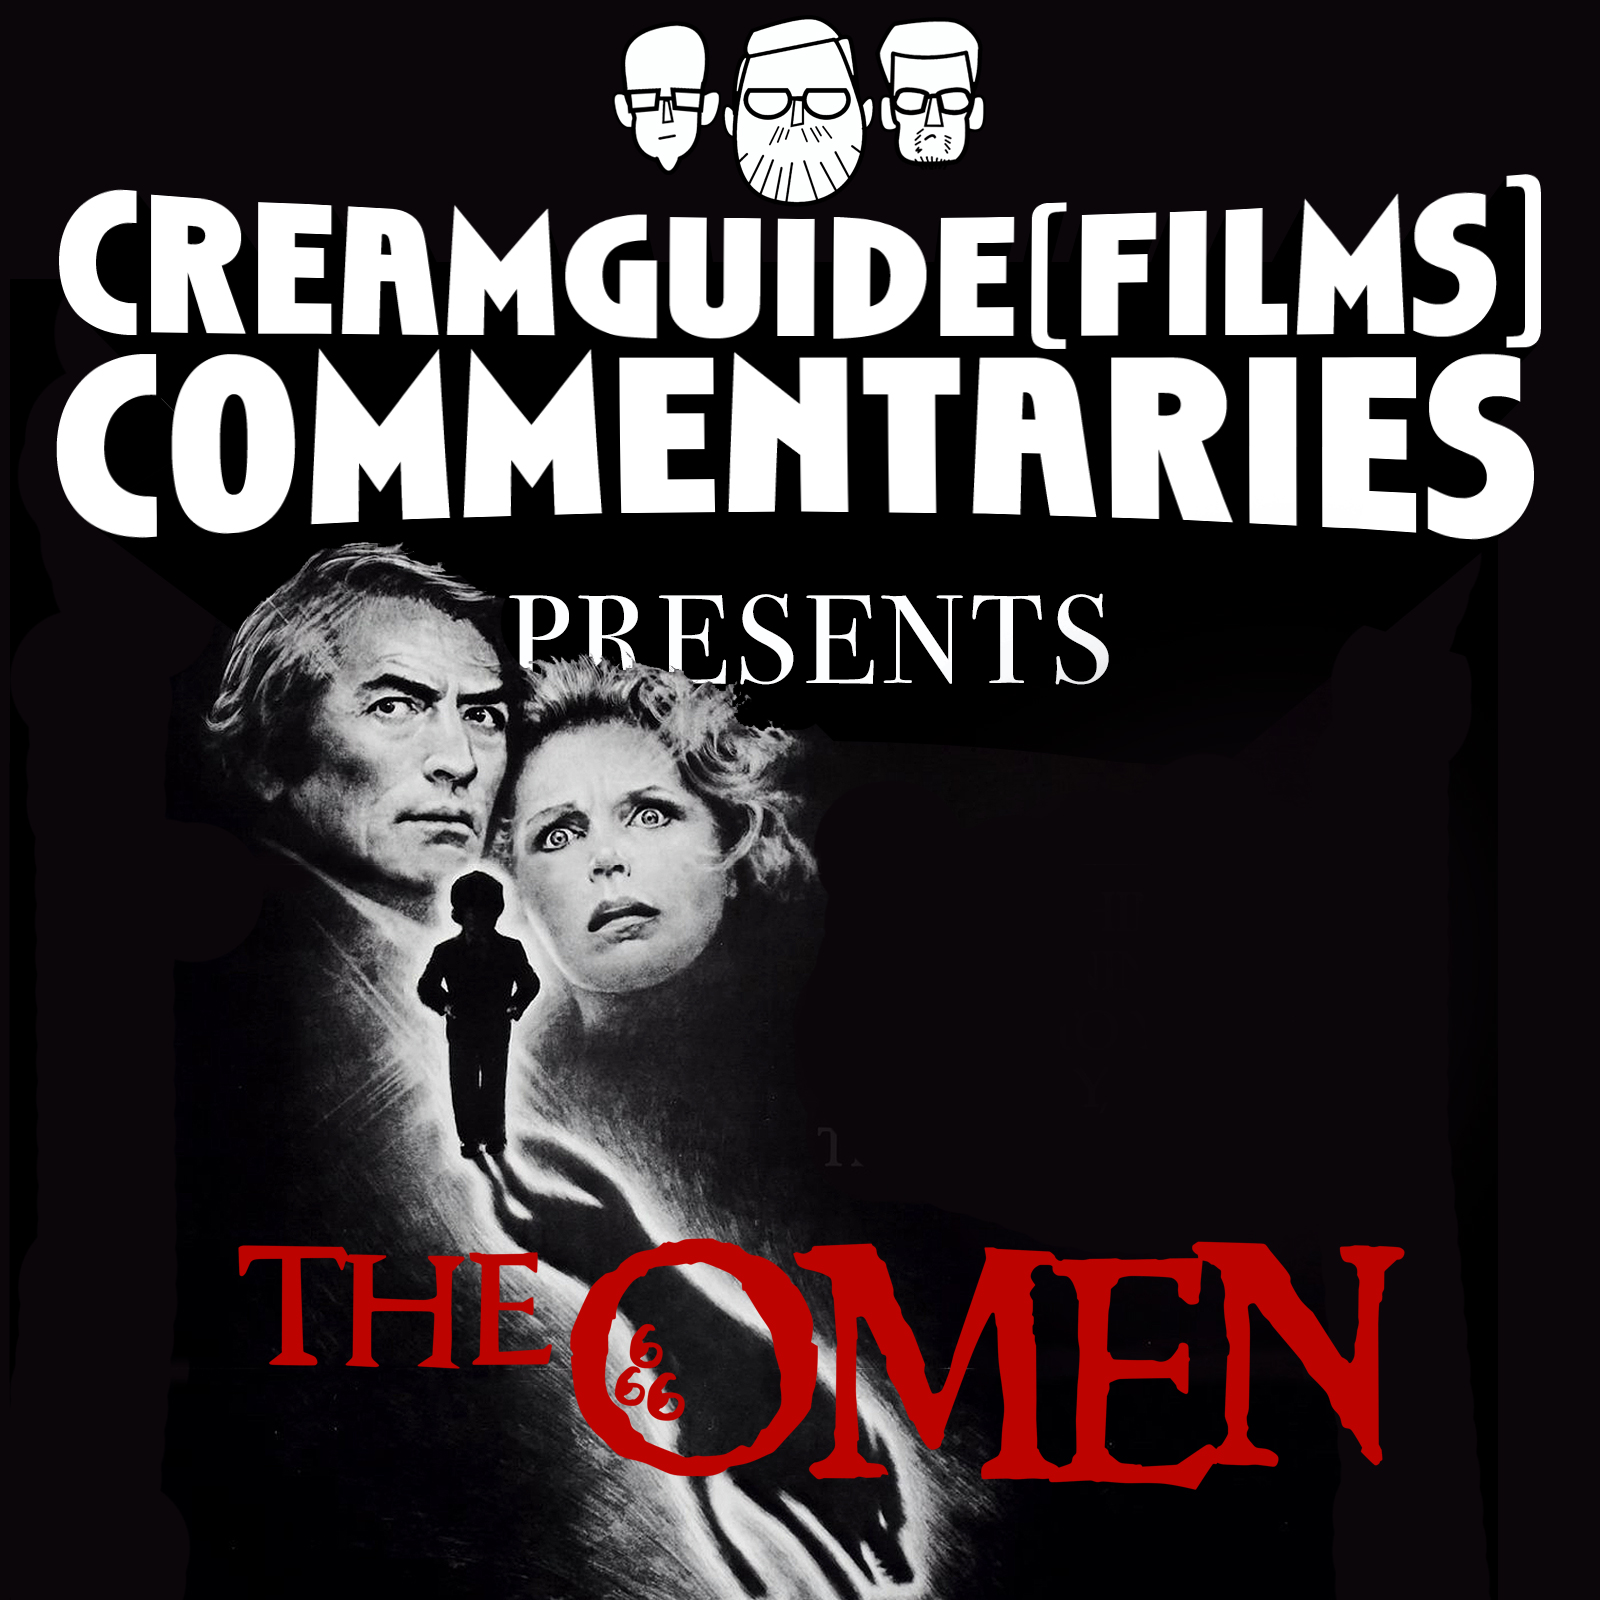 Creamguide(Films) Commentaries: The Omen